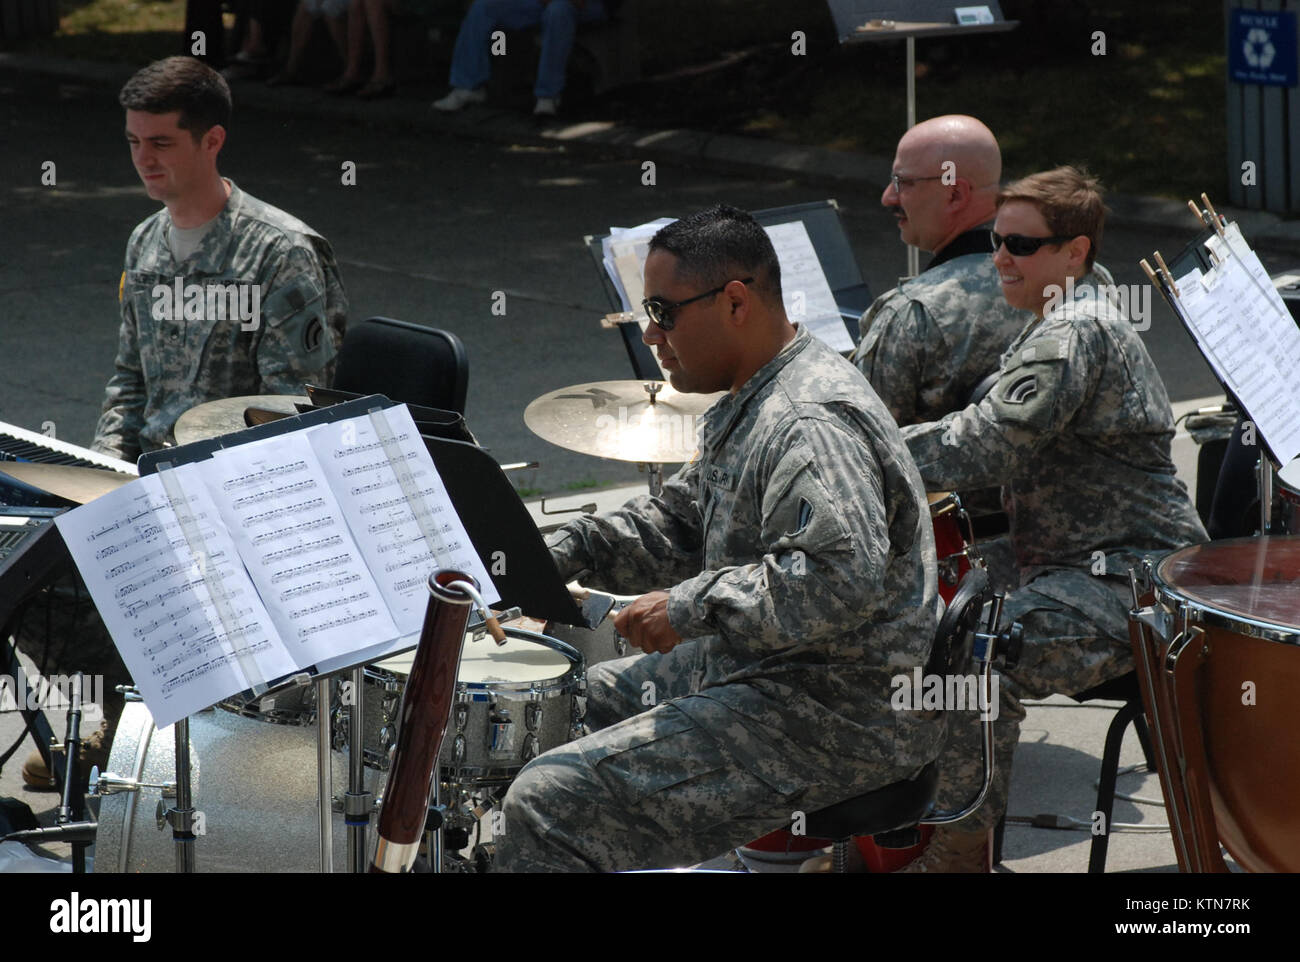 ALBANY, N.Y. -- Members of the New York Army National Guard's 42nd Infantry Division Band percussion section perform at West Capitol Park at the New York State Capitol July 18.  The Soldiers are performing at public venues across New York State as part of their annual training this summer.  The 42nd Infantry Division Band is the musical ambassador for the 42nd Infantry Division, New York Army National Guard.  The band's base of operations is Camp Smith, Cortlandt Manor, NY.  US Army photo by COL Richard Goldenberg, New York National Guard. Stock Photo